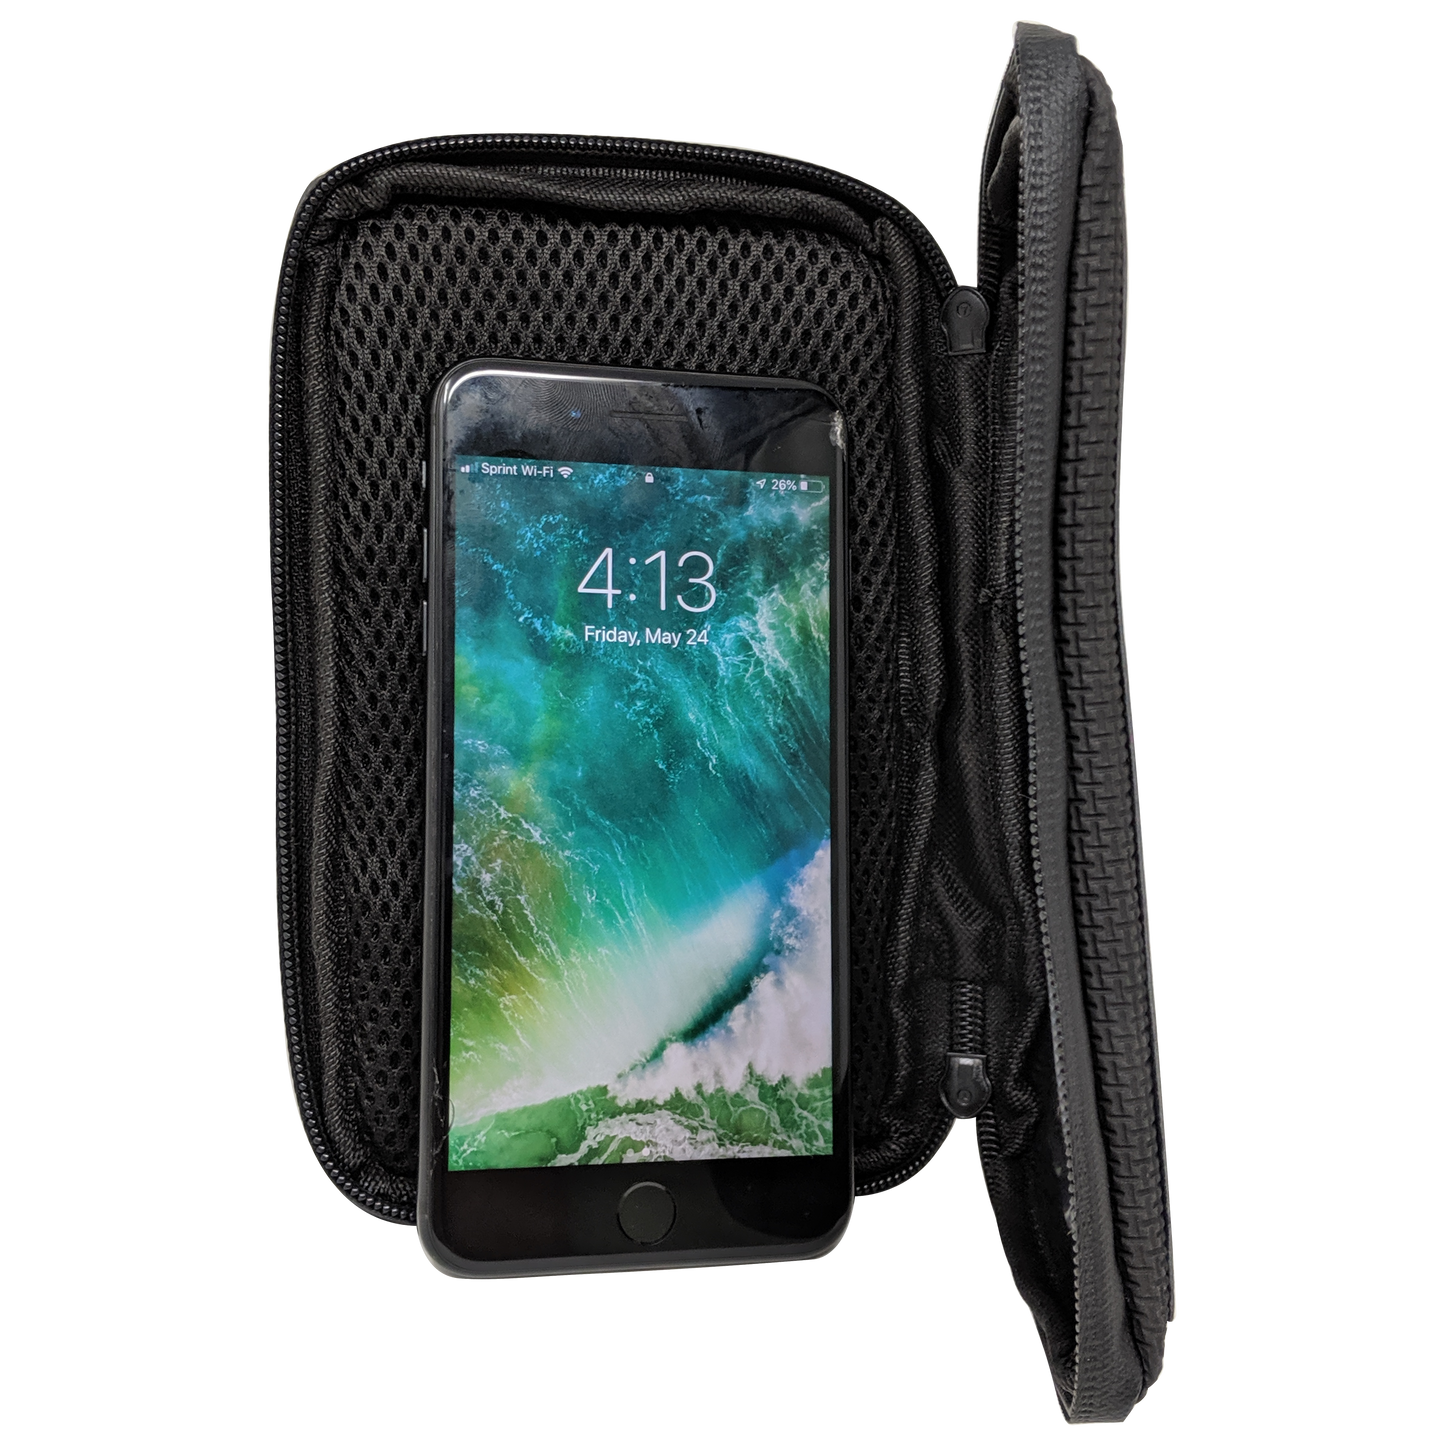 VS419 Motorcycle Magnetic Cell Phone & GPS Holder Tank Bag